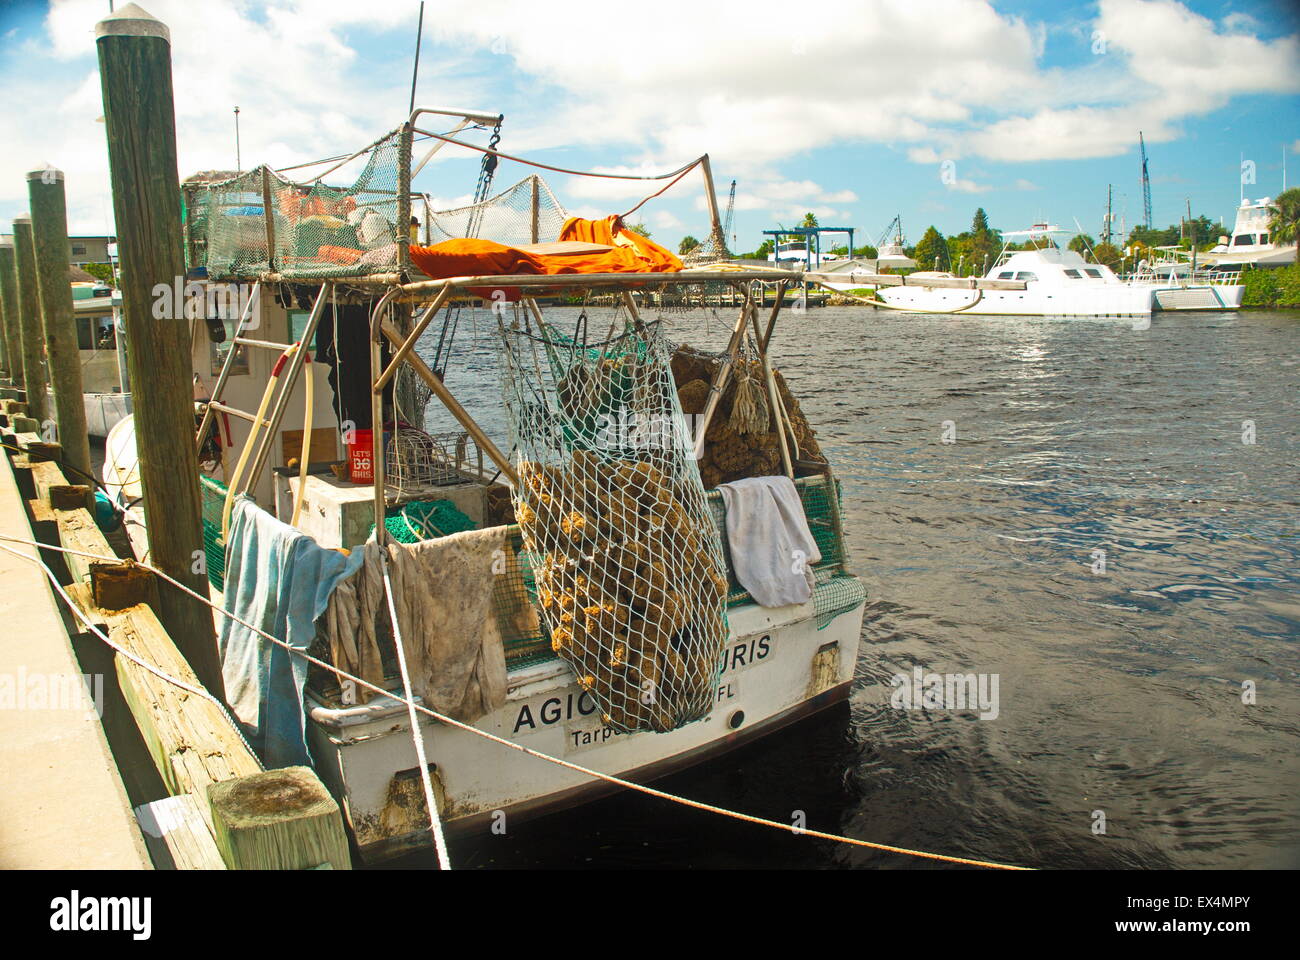 Tarpon Springs, Florida harbor with sponge diving boat at the dock. Stock Photo